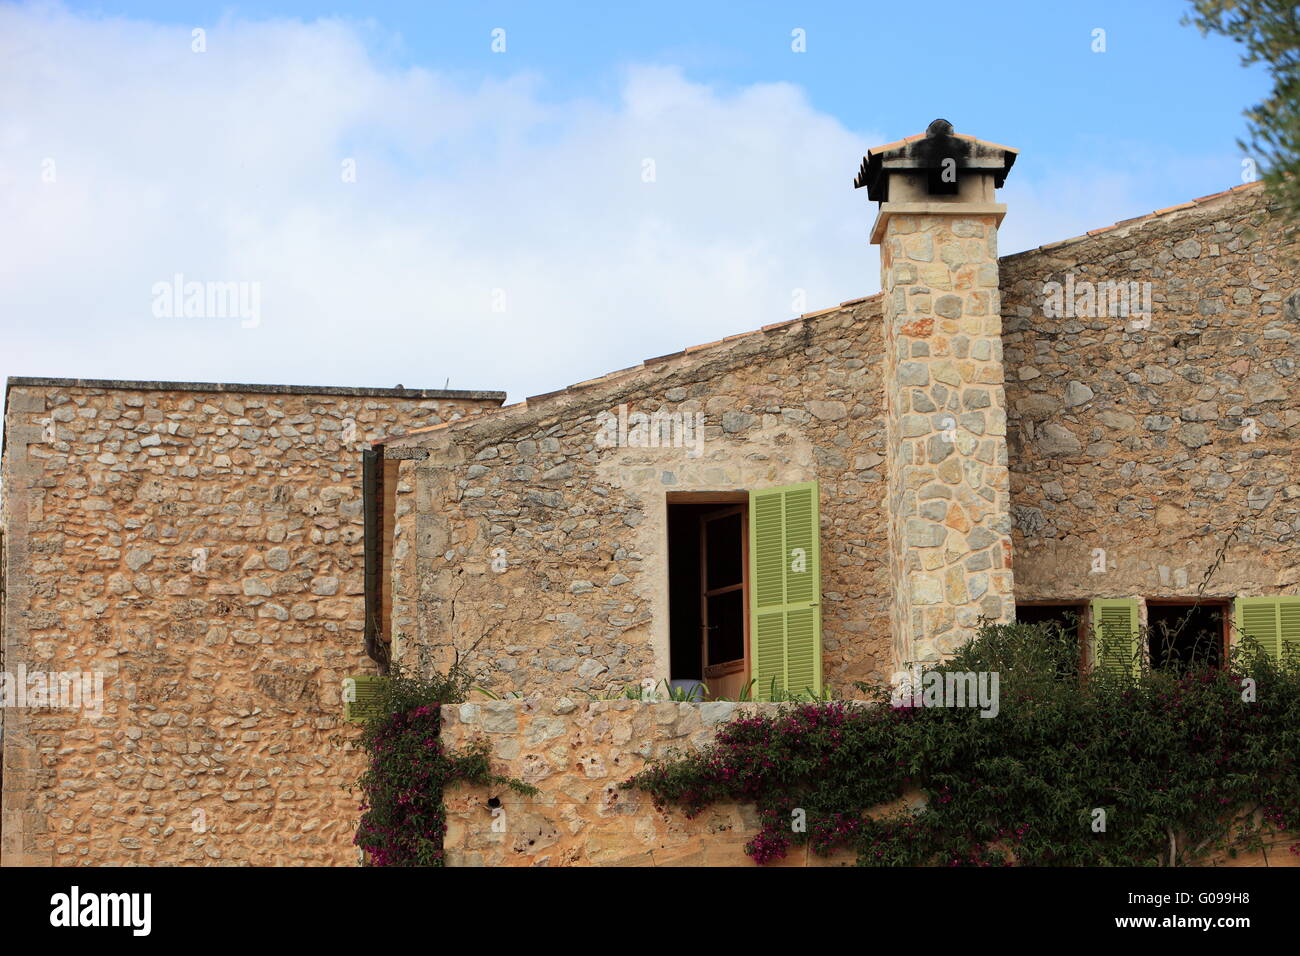 Stone building with chimney Stock Photo